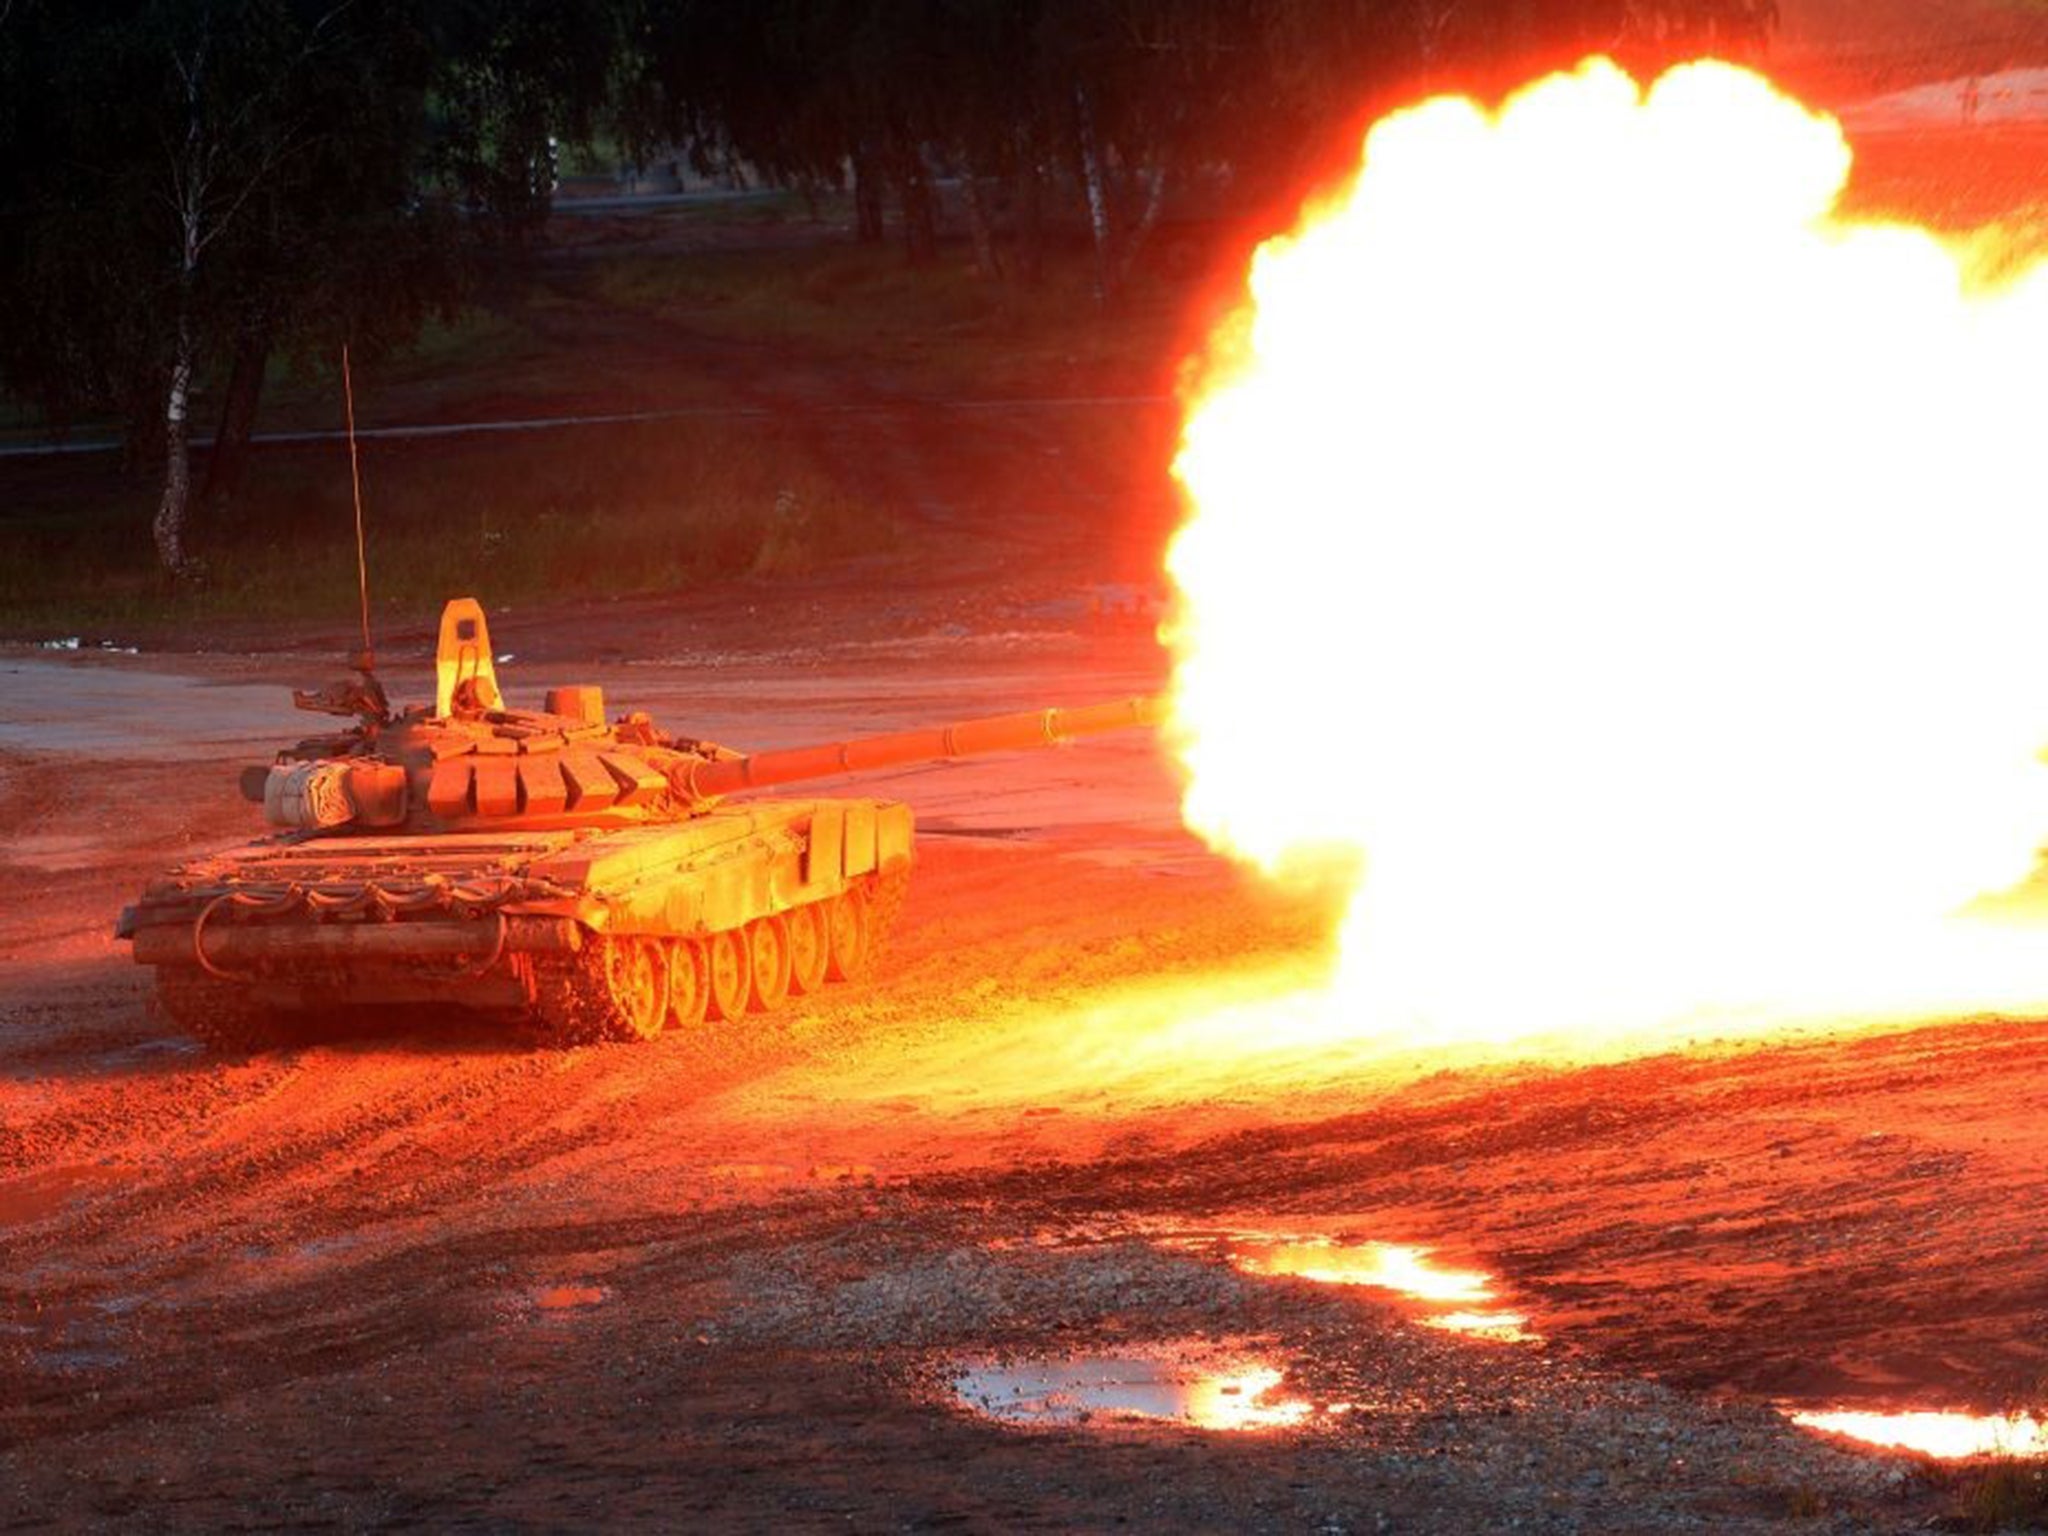 A Russian T-90 tank fires during the 'Army-2015' international military forum in Kubinka, outside Moscow.